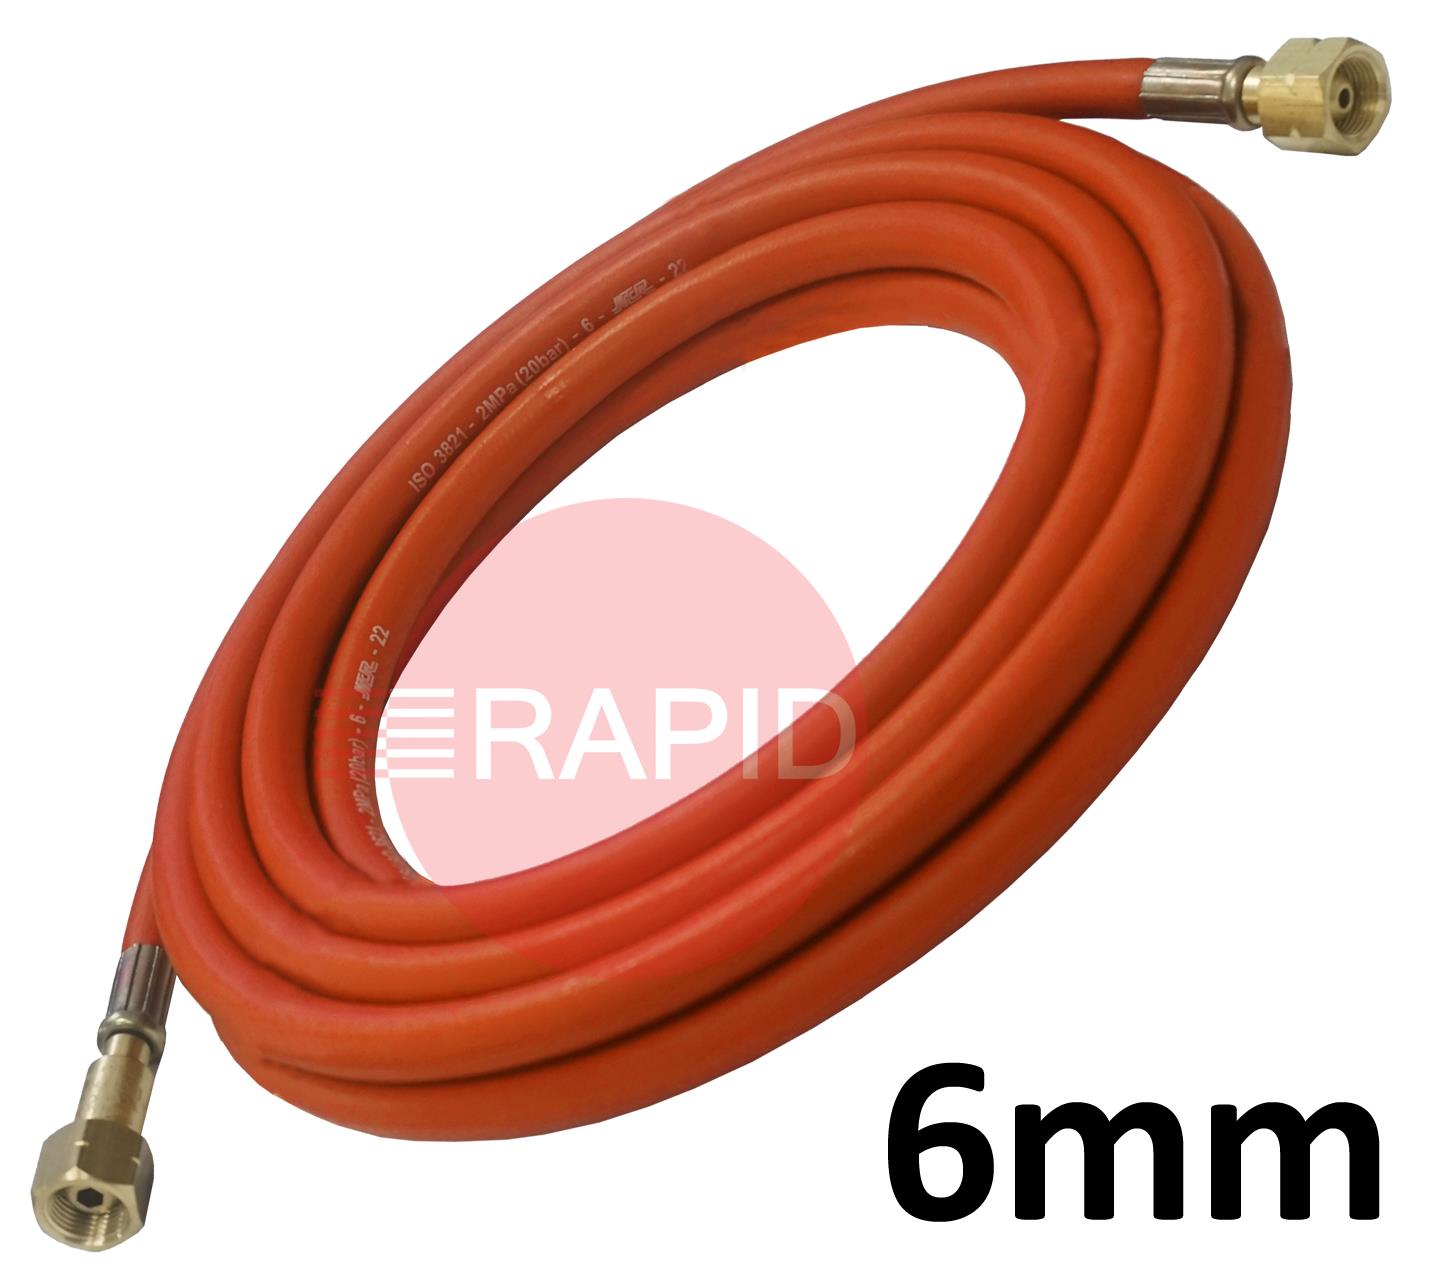 A5140  Fitted Propane Hose. 6mm Bore. G3/8 Check Valve & G3/8 Regulator Connection - 5m